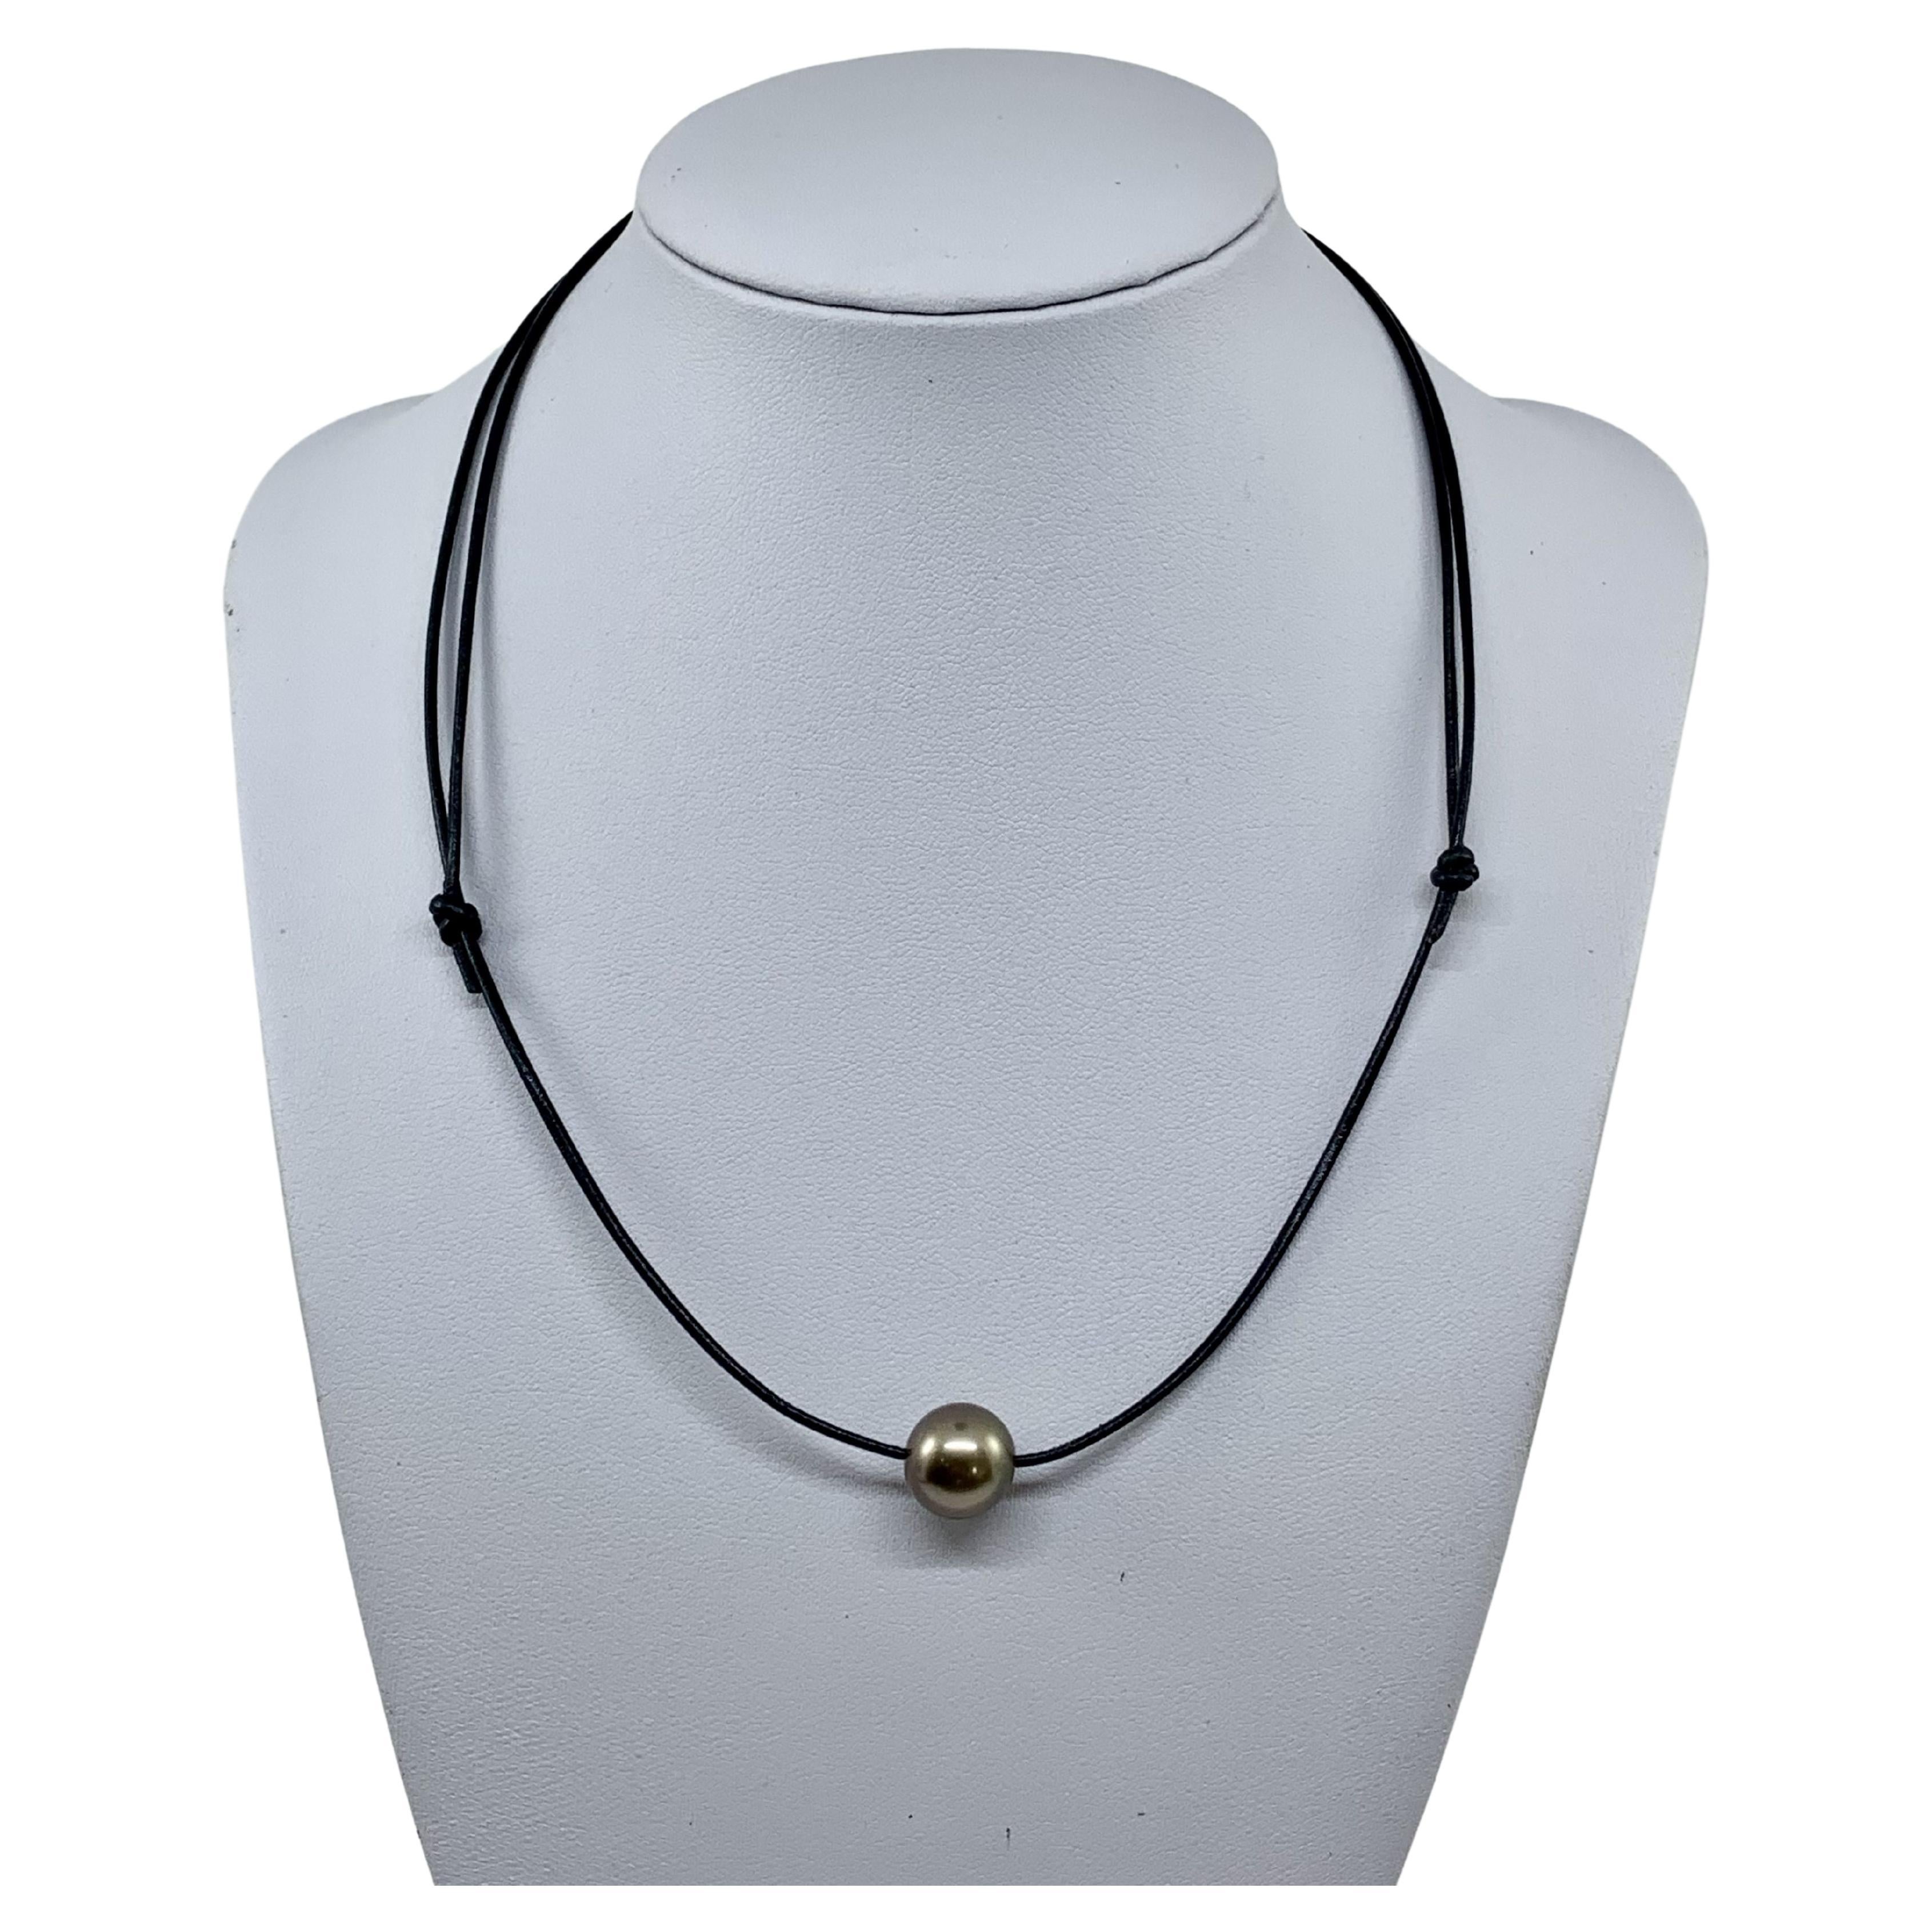 11.1mm Tahitian Pearl on Leather Cord Necklace